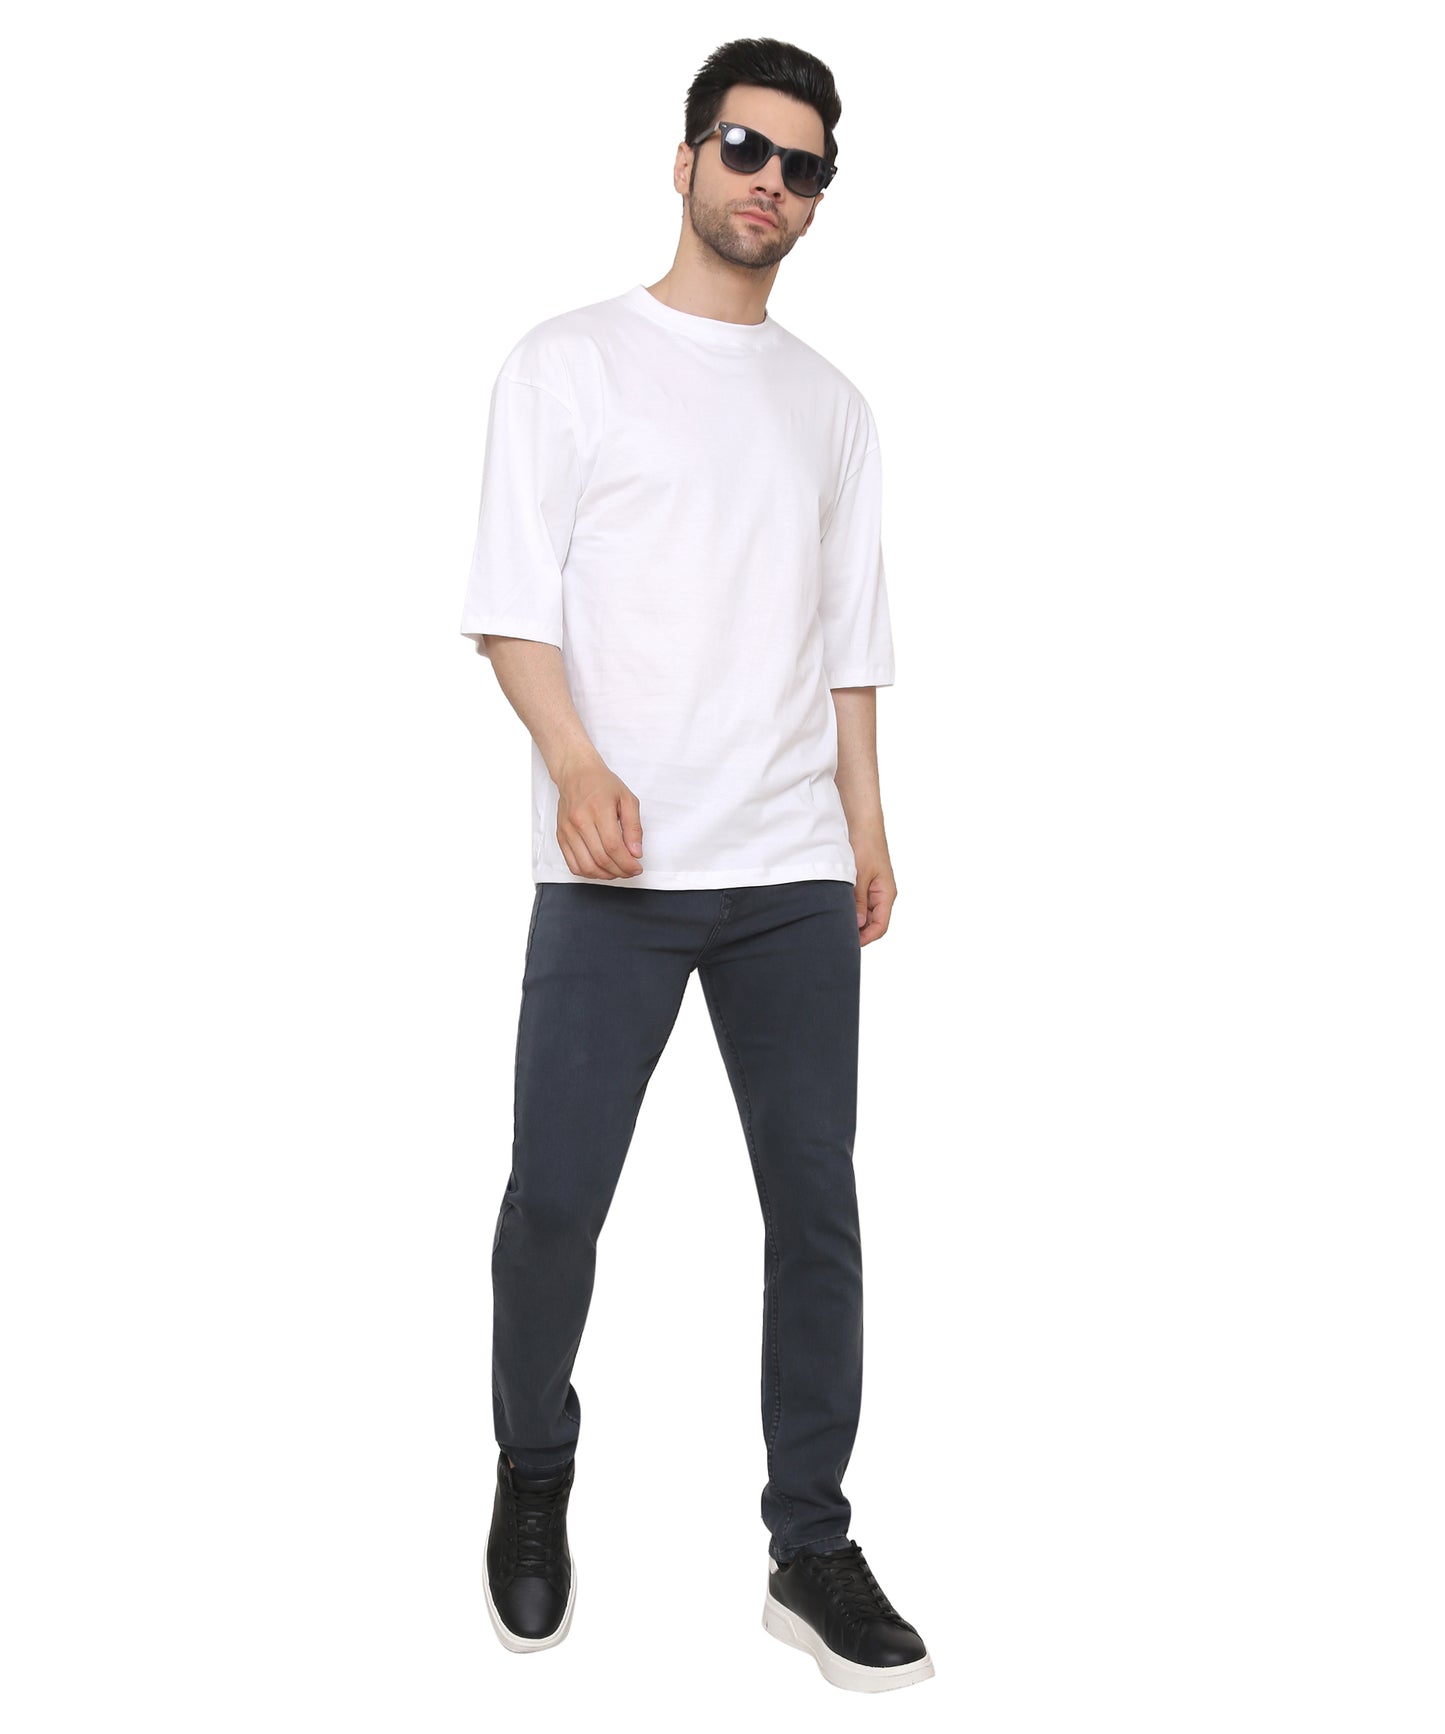 White Oversized Cotton T-shirts Relaxed Fit Tees for Men